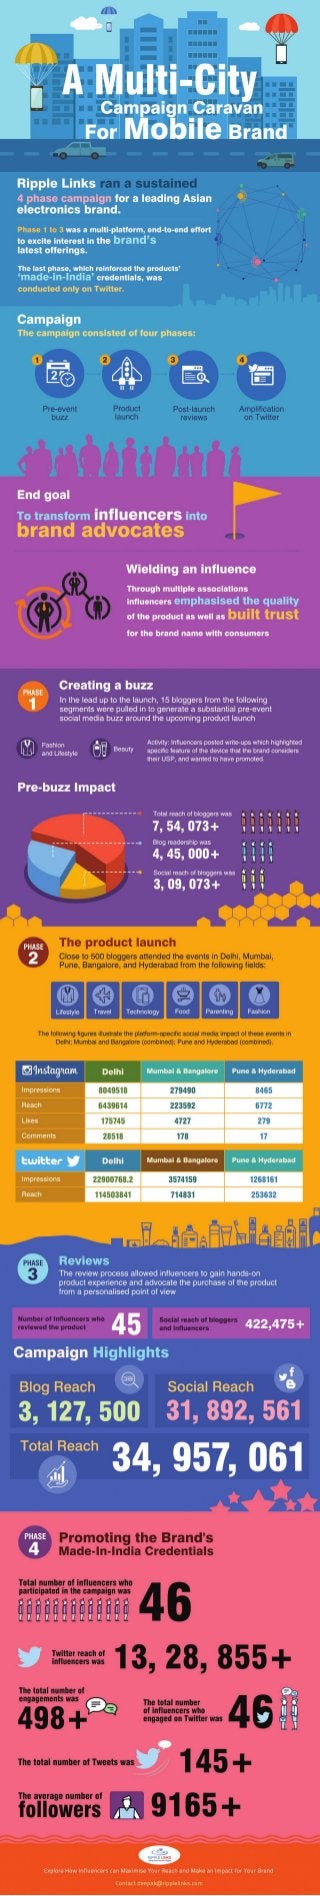 Influencer Marketing Case Study - Launching Three Mobile Phones with Explosive Social Buzz for Asus